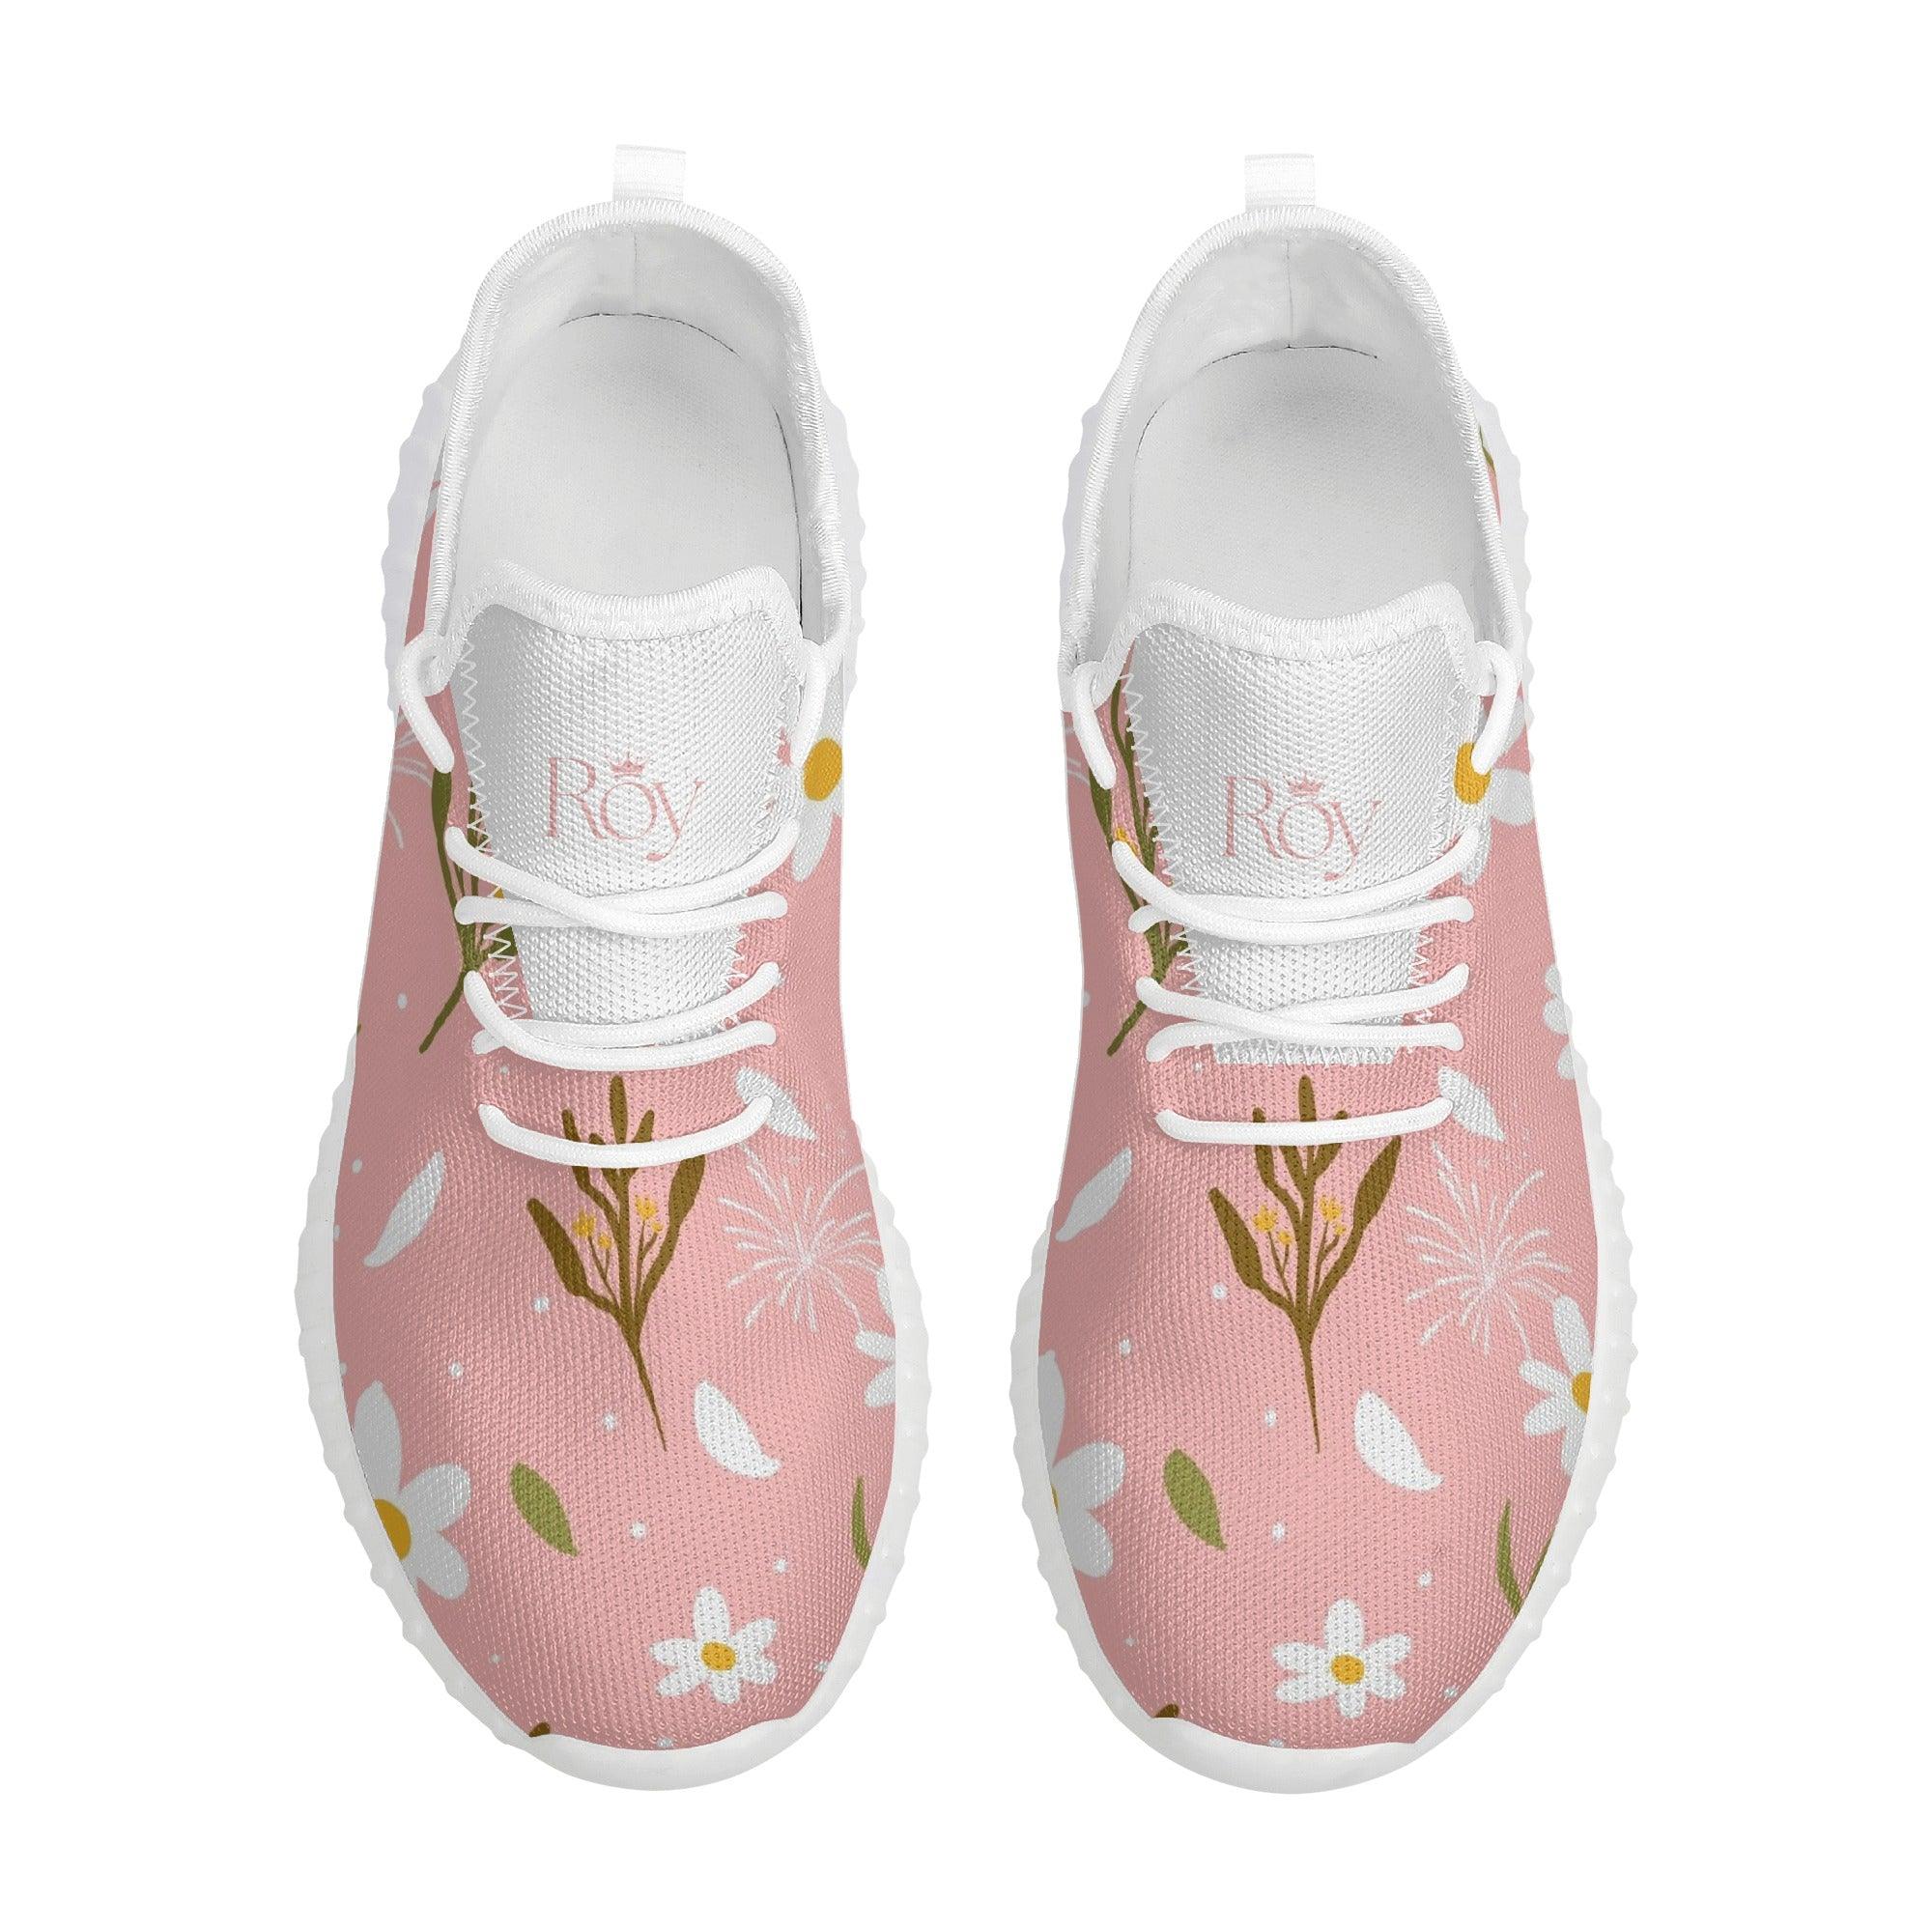 Roy Pink Floral Womens Mesh Knit Sneakers - Stylish & Comfortable